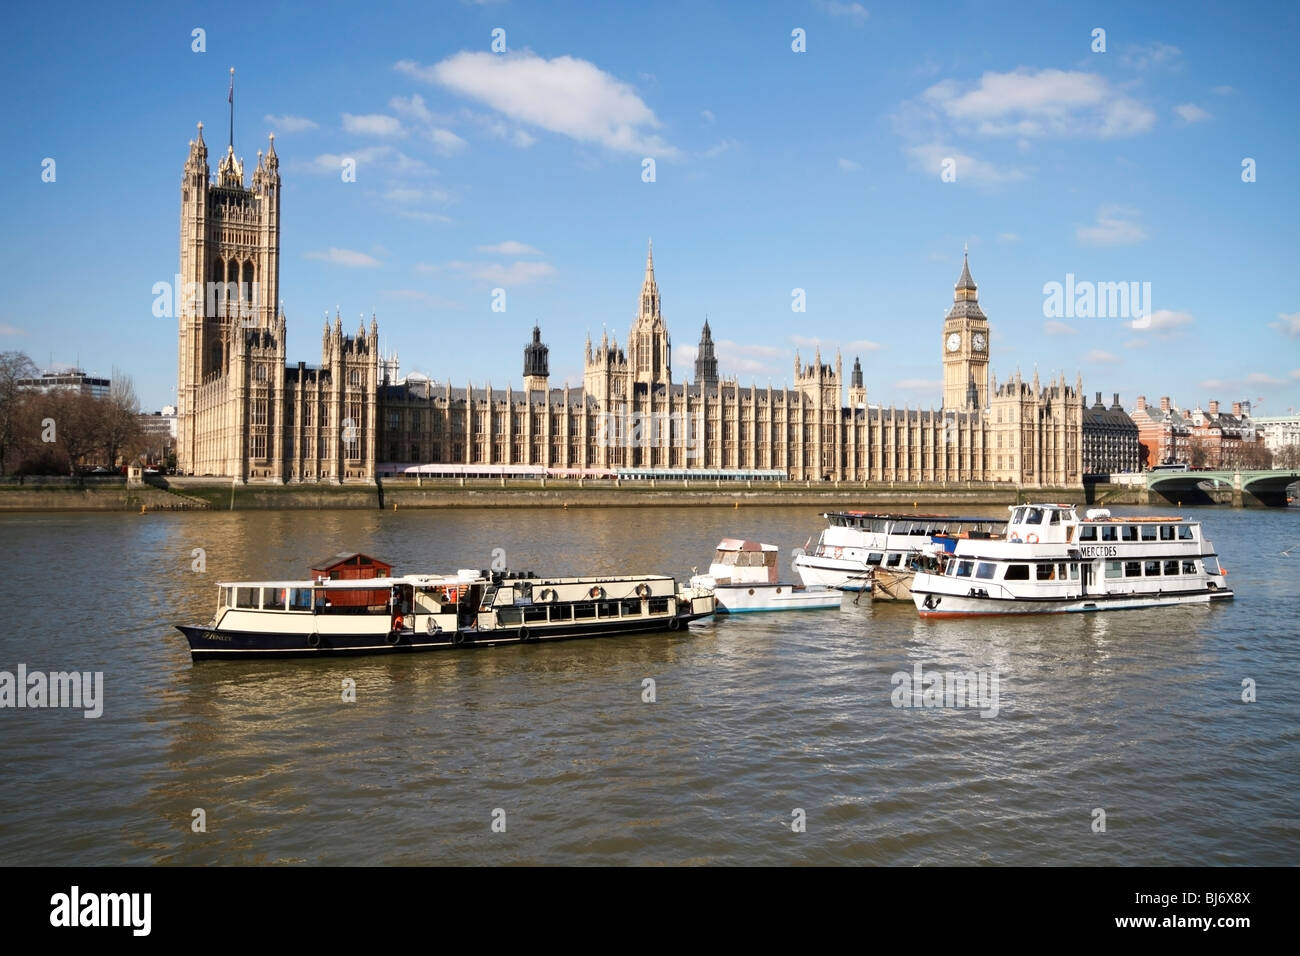 The Houses of Parliament, Westminster Stock Photo